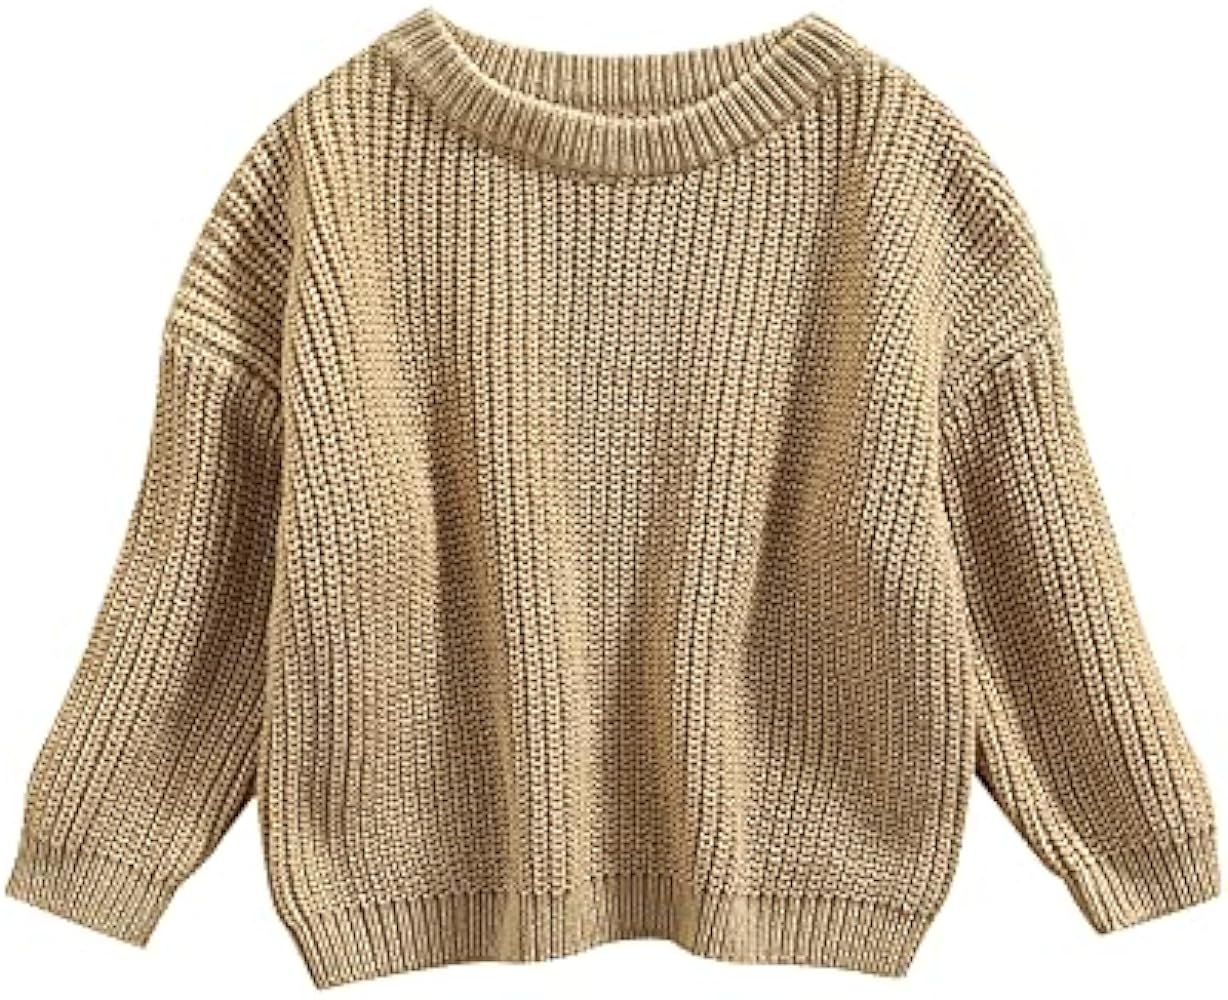 Autumn Winter Warm Outfits Baby Girl Cute Long Sleeve Knitted Sweater Pullover Top | Amazon (US)